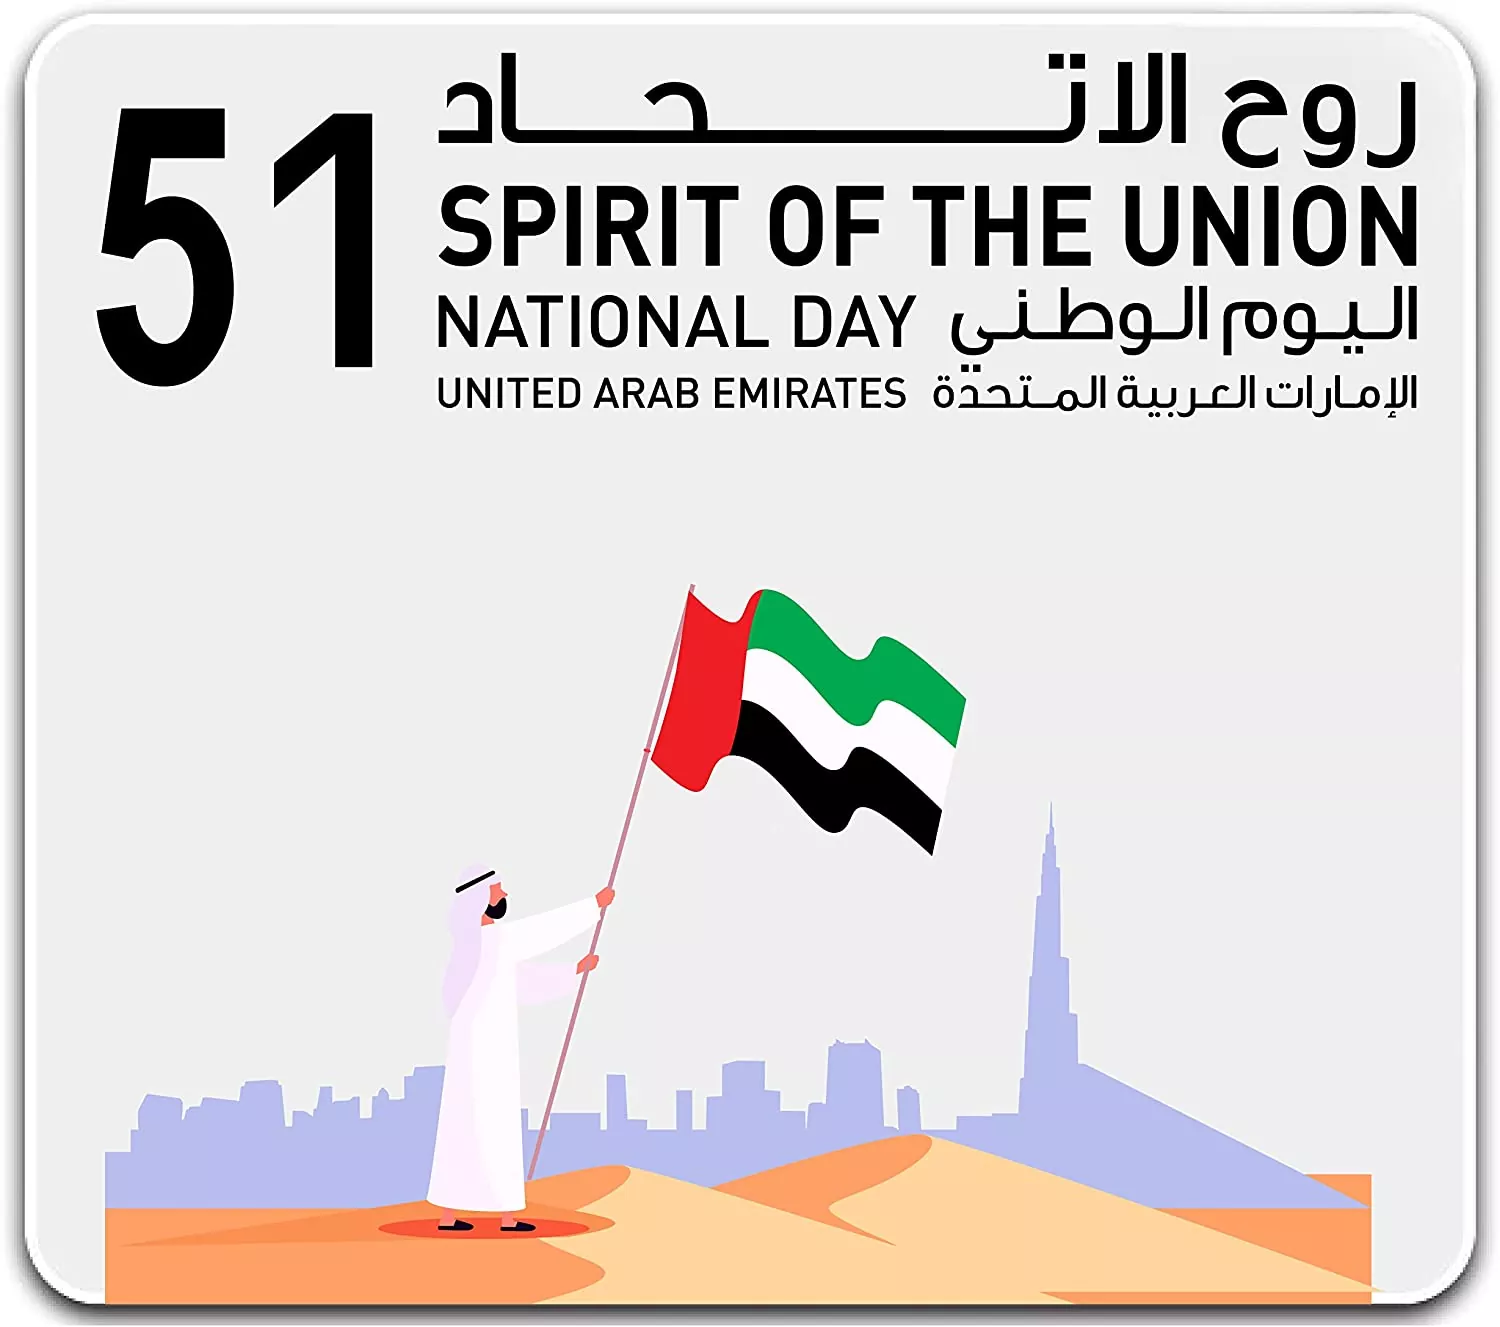 UAE NATIONAL DAY MOUSE PAD (Design 7)